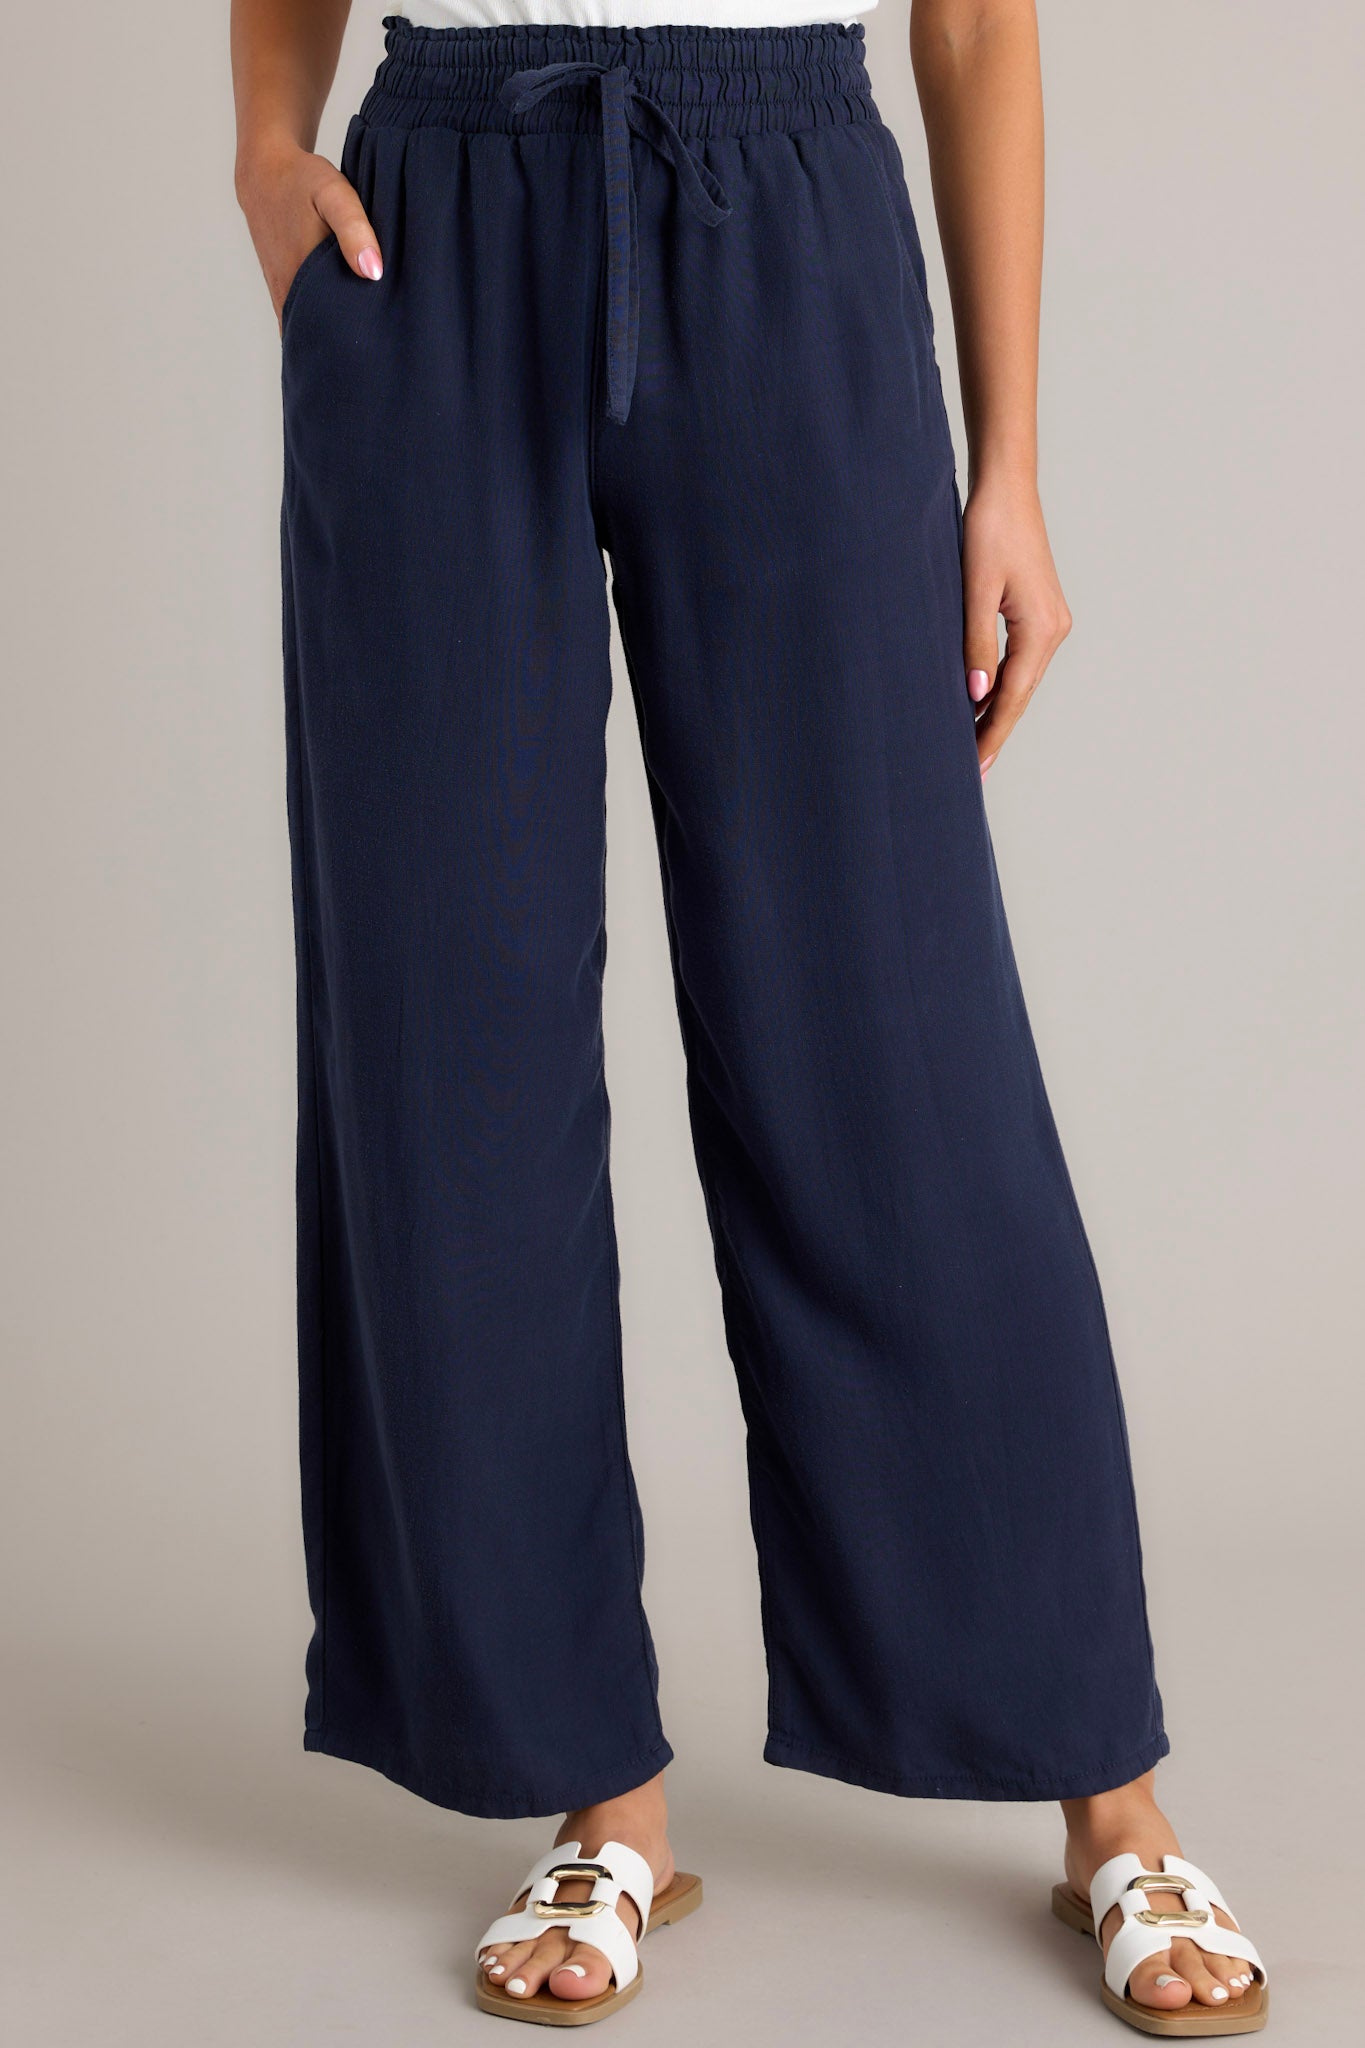 Front view of the material of these navy pants that feature a high waisted design, an elastic waistband with a self-tie drawstring, functional front & back pockets, and a wide leg.